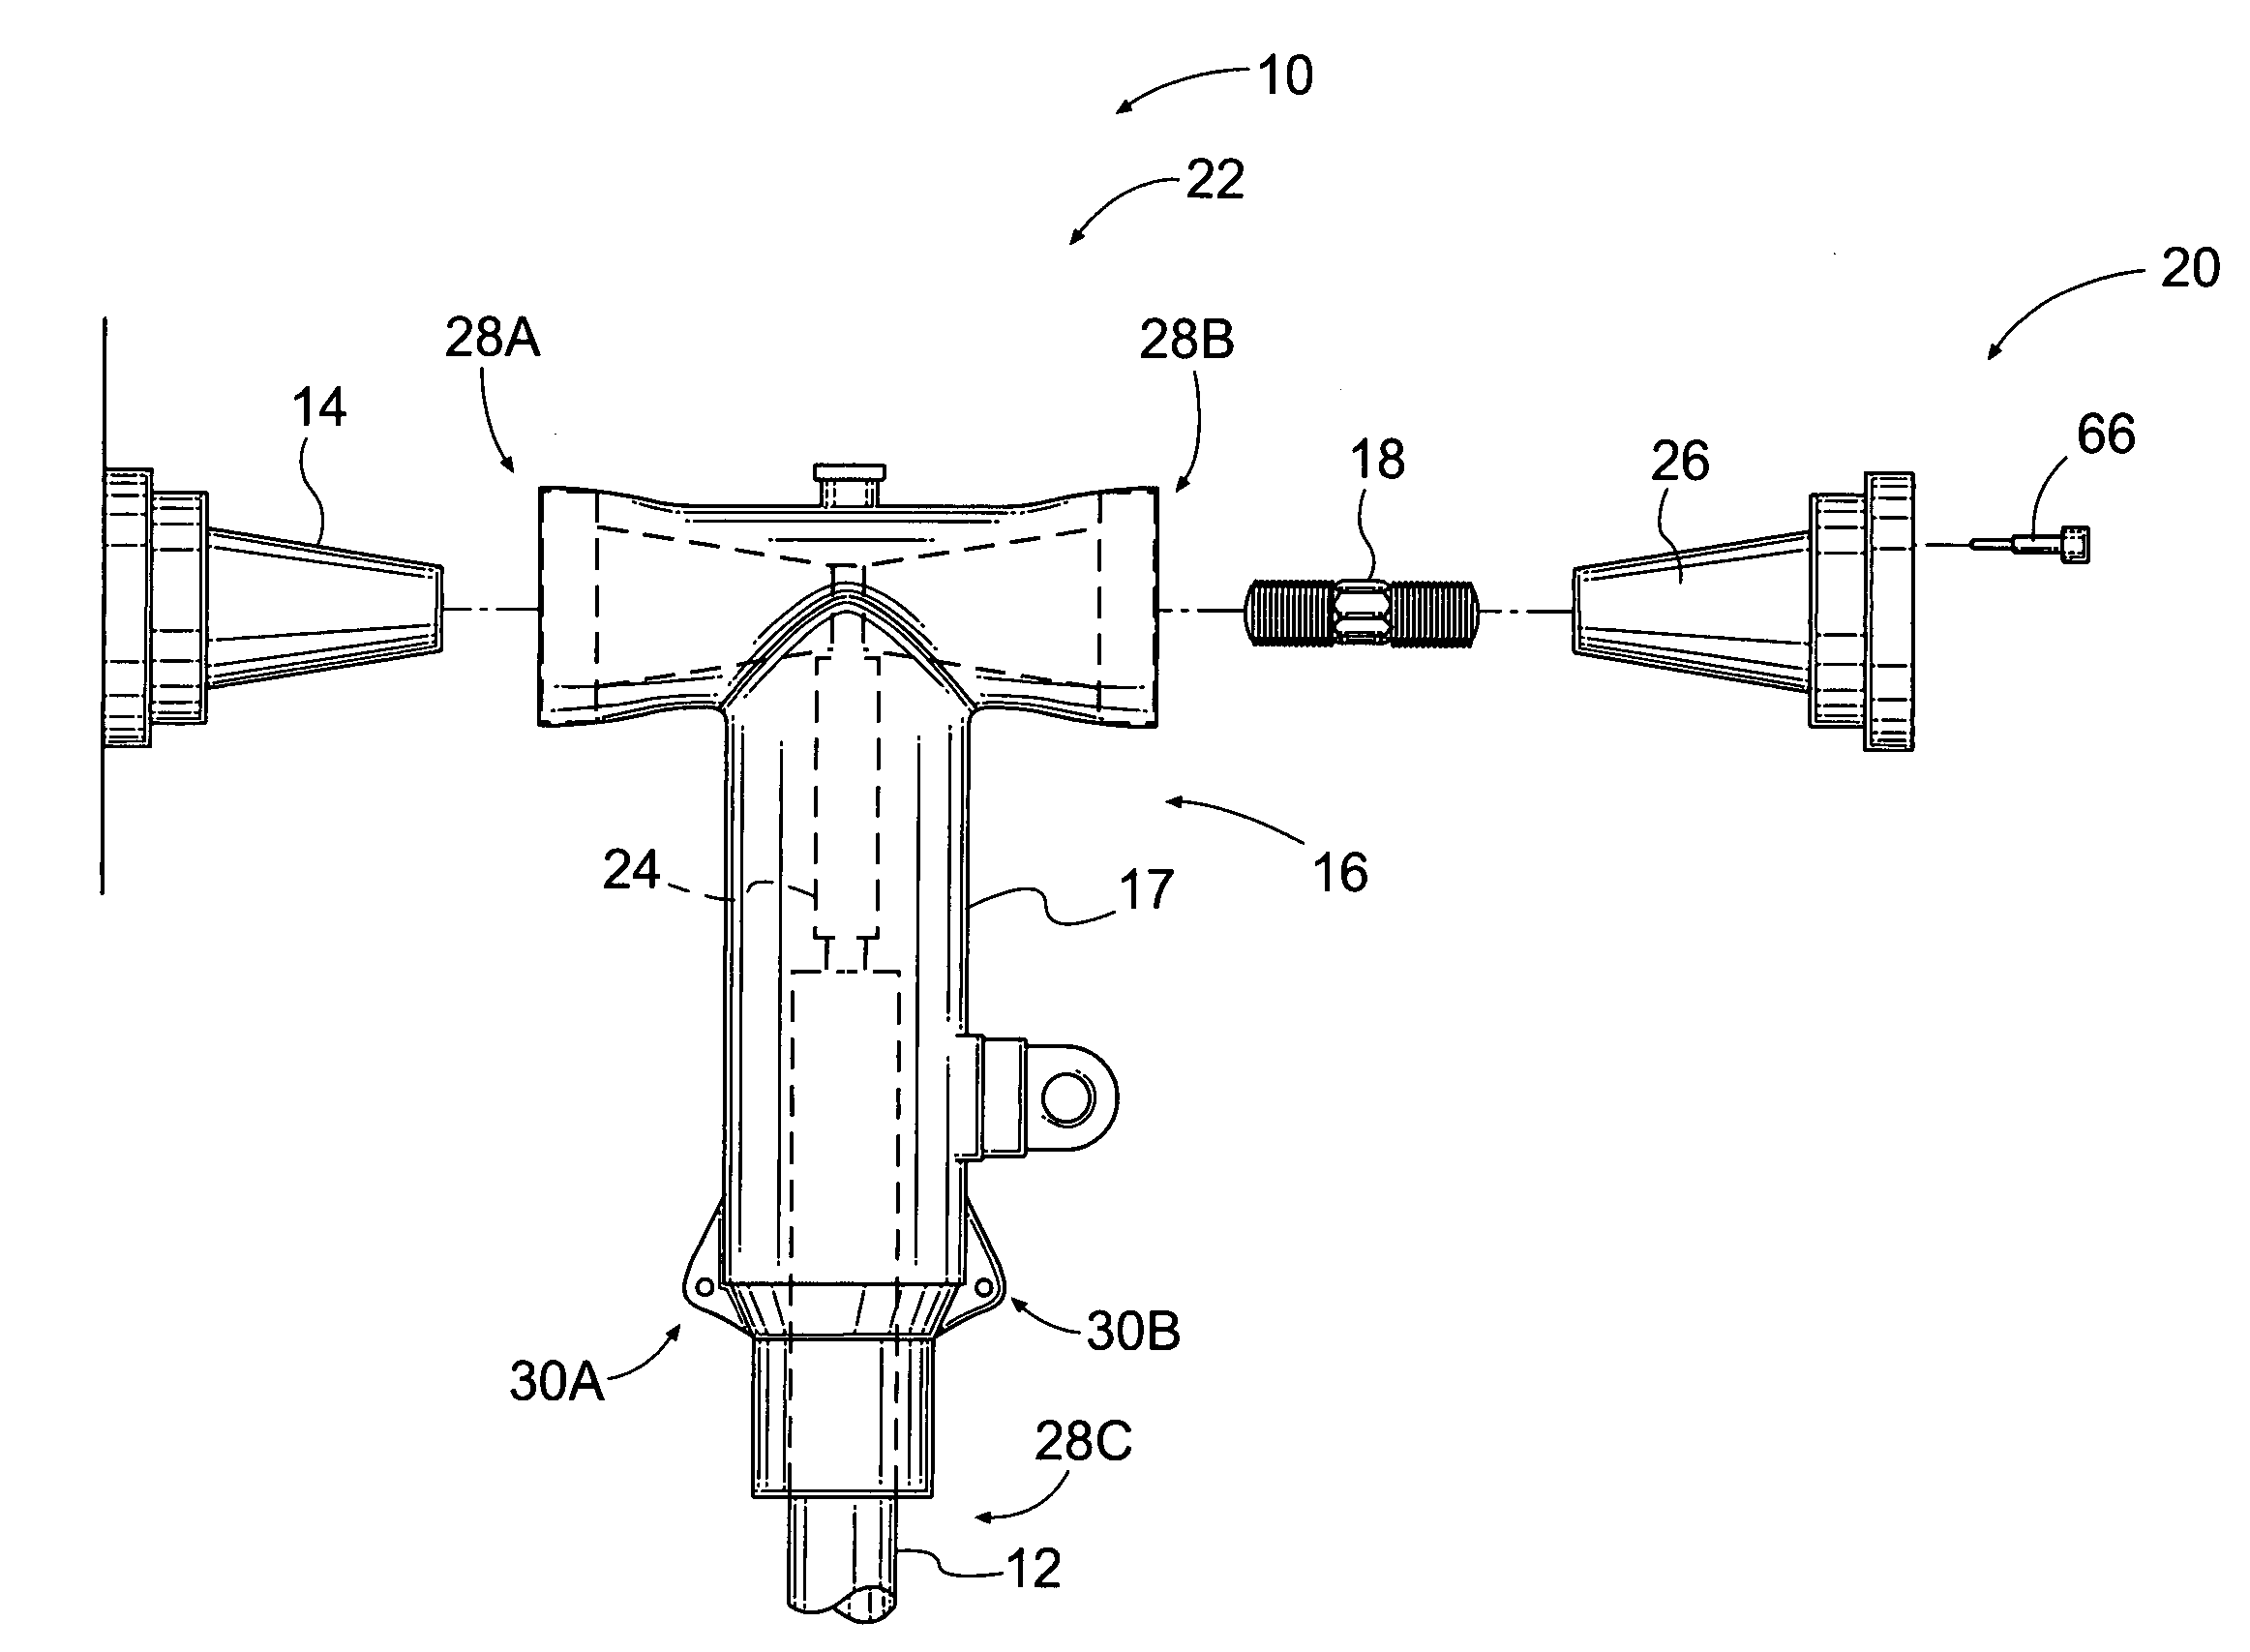 Probe apparatus for use in a separable connector, and systems including same